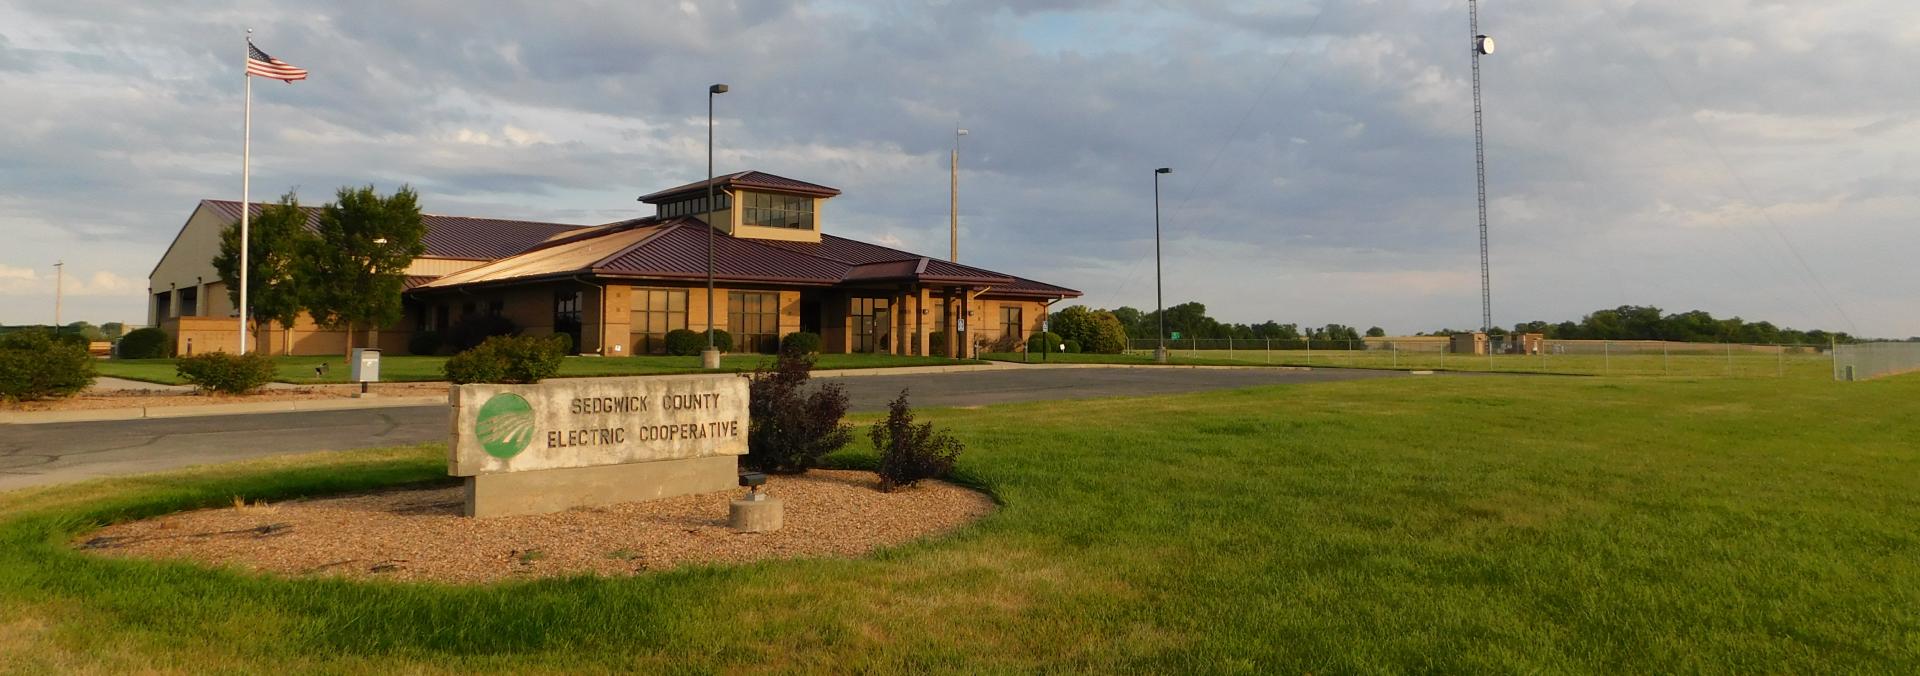 Sedgwick County Electric Cooperative Building